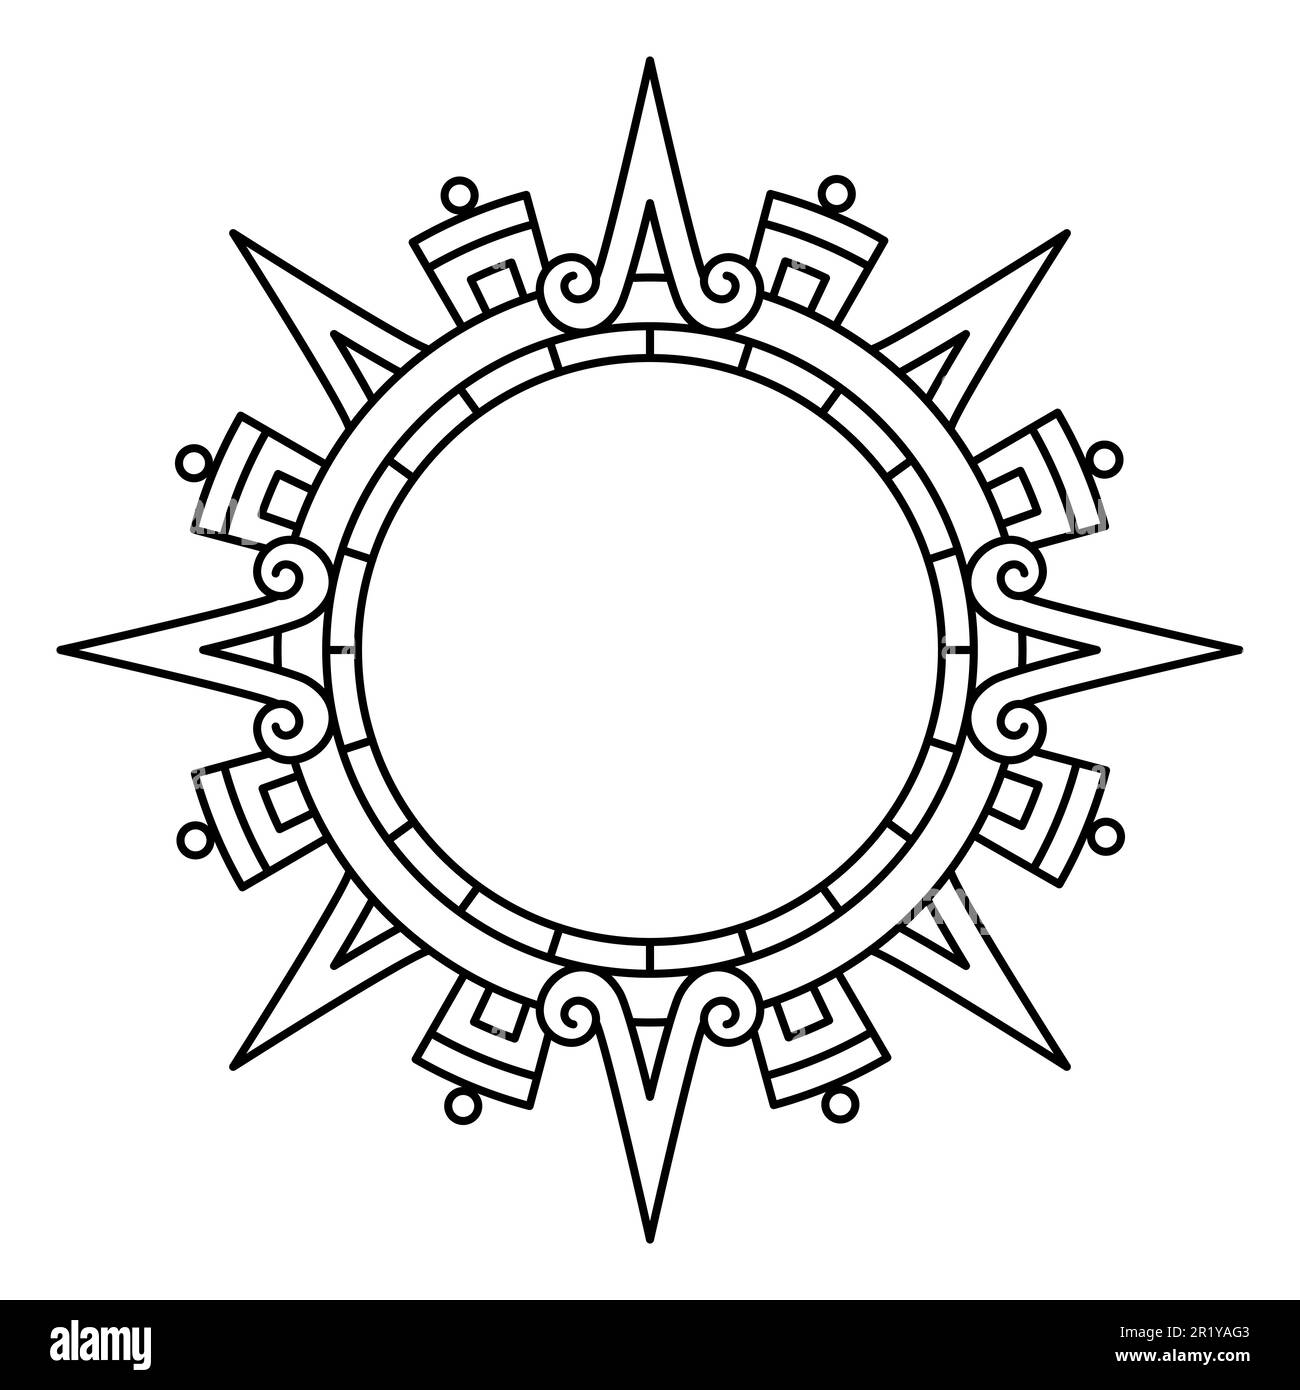 Aztec solar disk, sun symbol and diadem, representing the Aztec sun deity Tonatiuh. 4 large arrows or rays pointing in the cardinal directions. Stock Photo